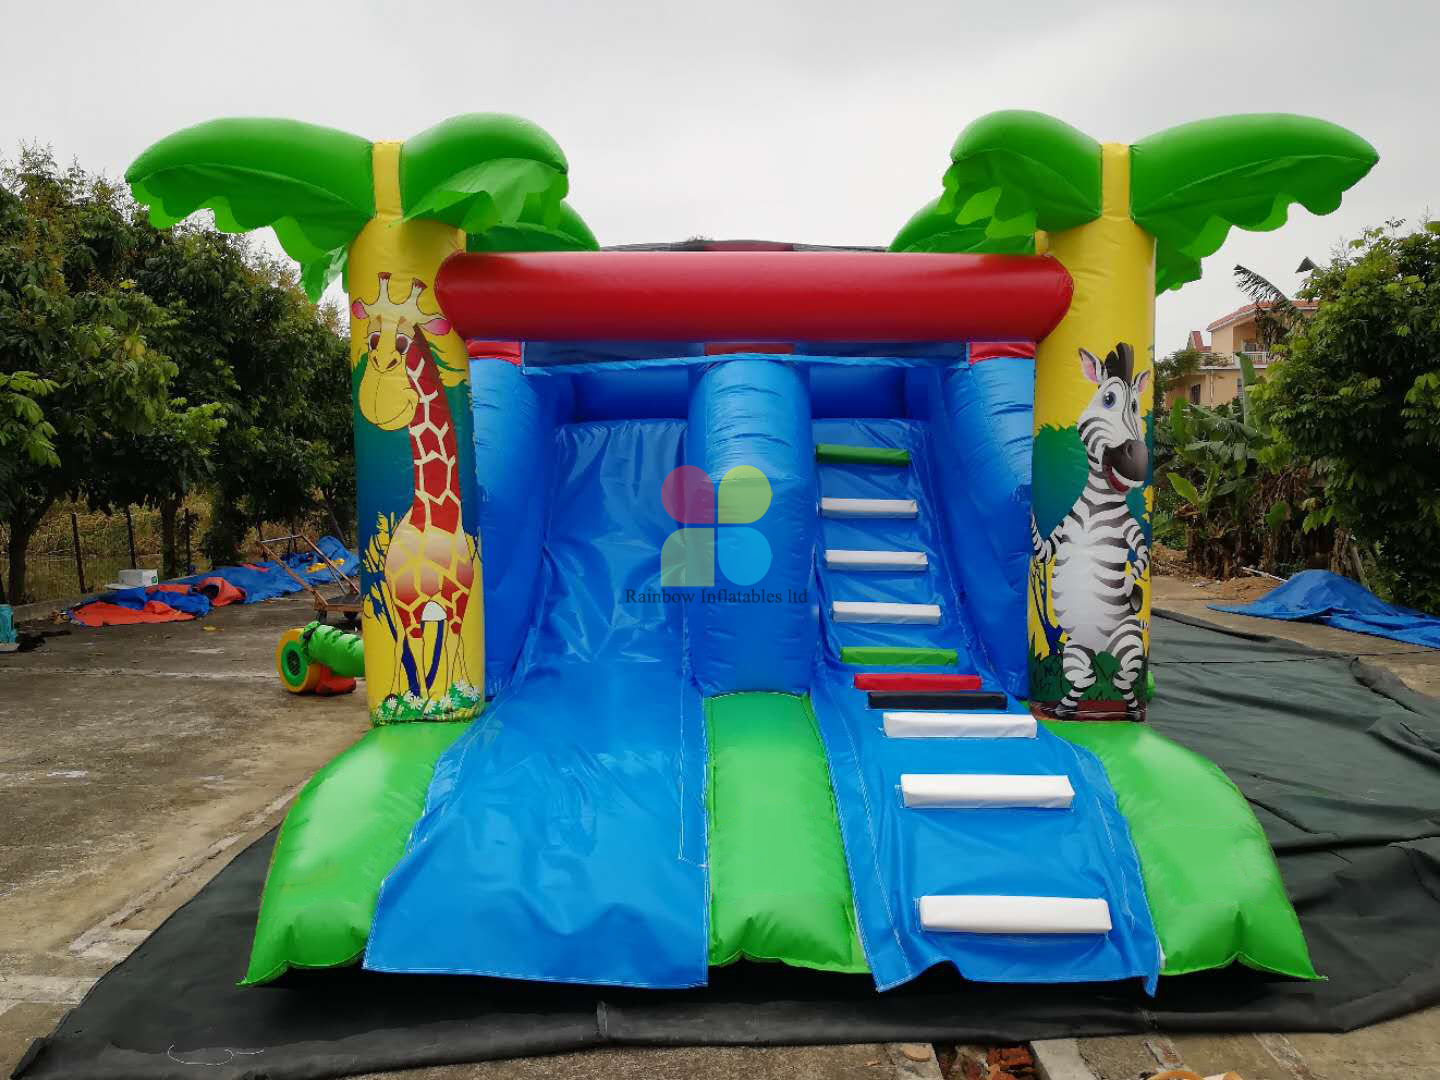 Small Size Inflatable Jungle Dray Slide Indoor Game